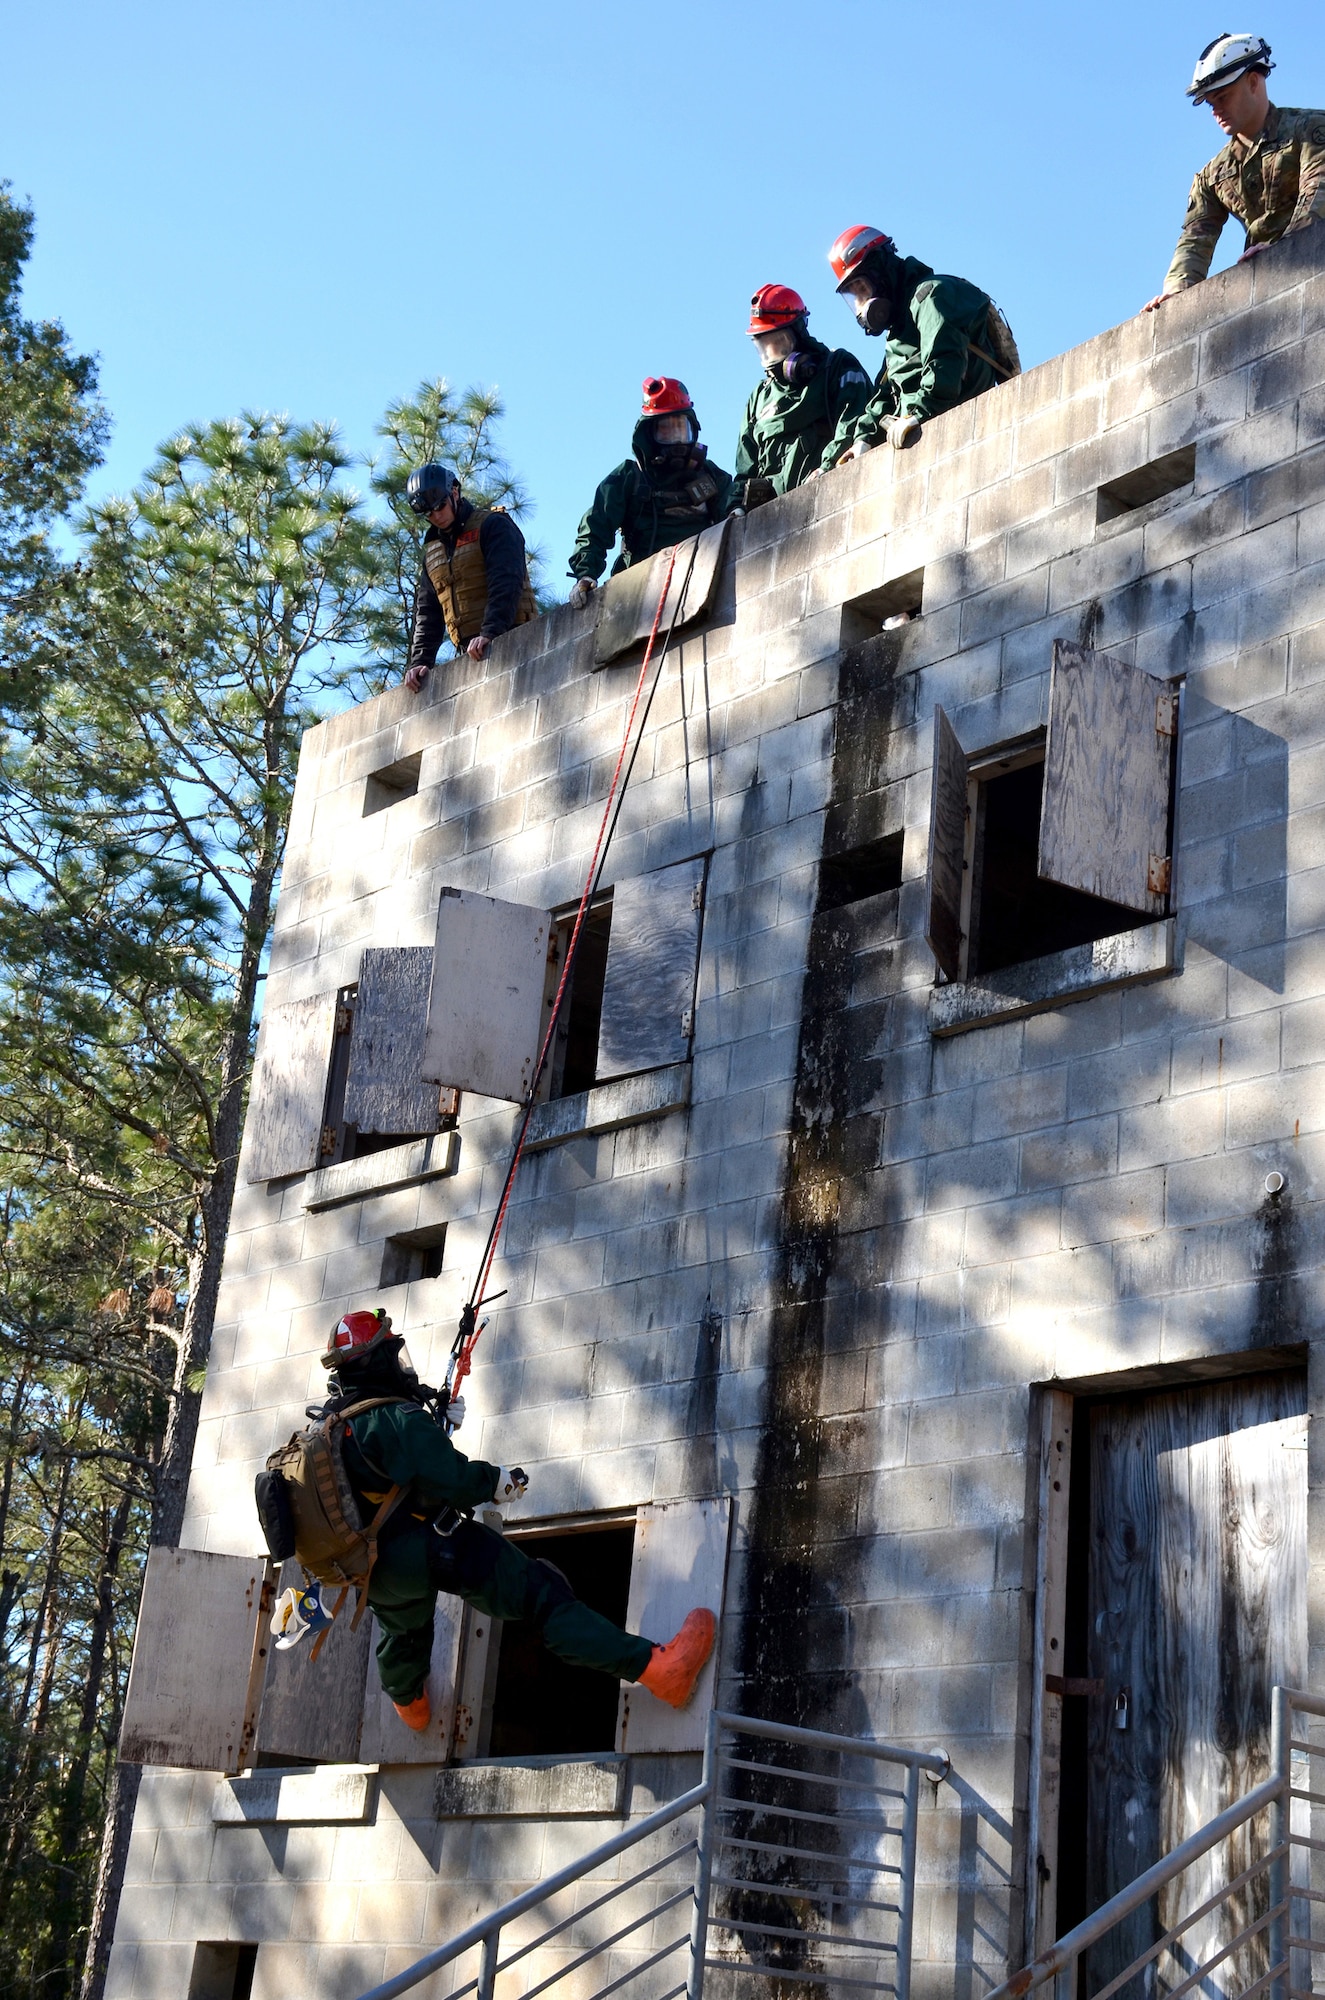 Soldiers with Kentucky National Guard's CBRNE Enhanced Response Force Package, or CERFP, repel off the top of a building to rescue a simulated victim during an exercise evaluation at Camp Blanding, Fla., Jan. 10, 2019. The CERFP was tasked with responding to a 10-kiloton nuclear explosion, establishing a support zone, searching the hot zone for victims, extracting and decontaminating the victims, and providing medical assistance. (U.S. Army National Guard photo by Sgt. Taylor Tribble)